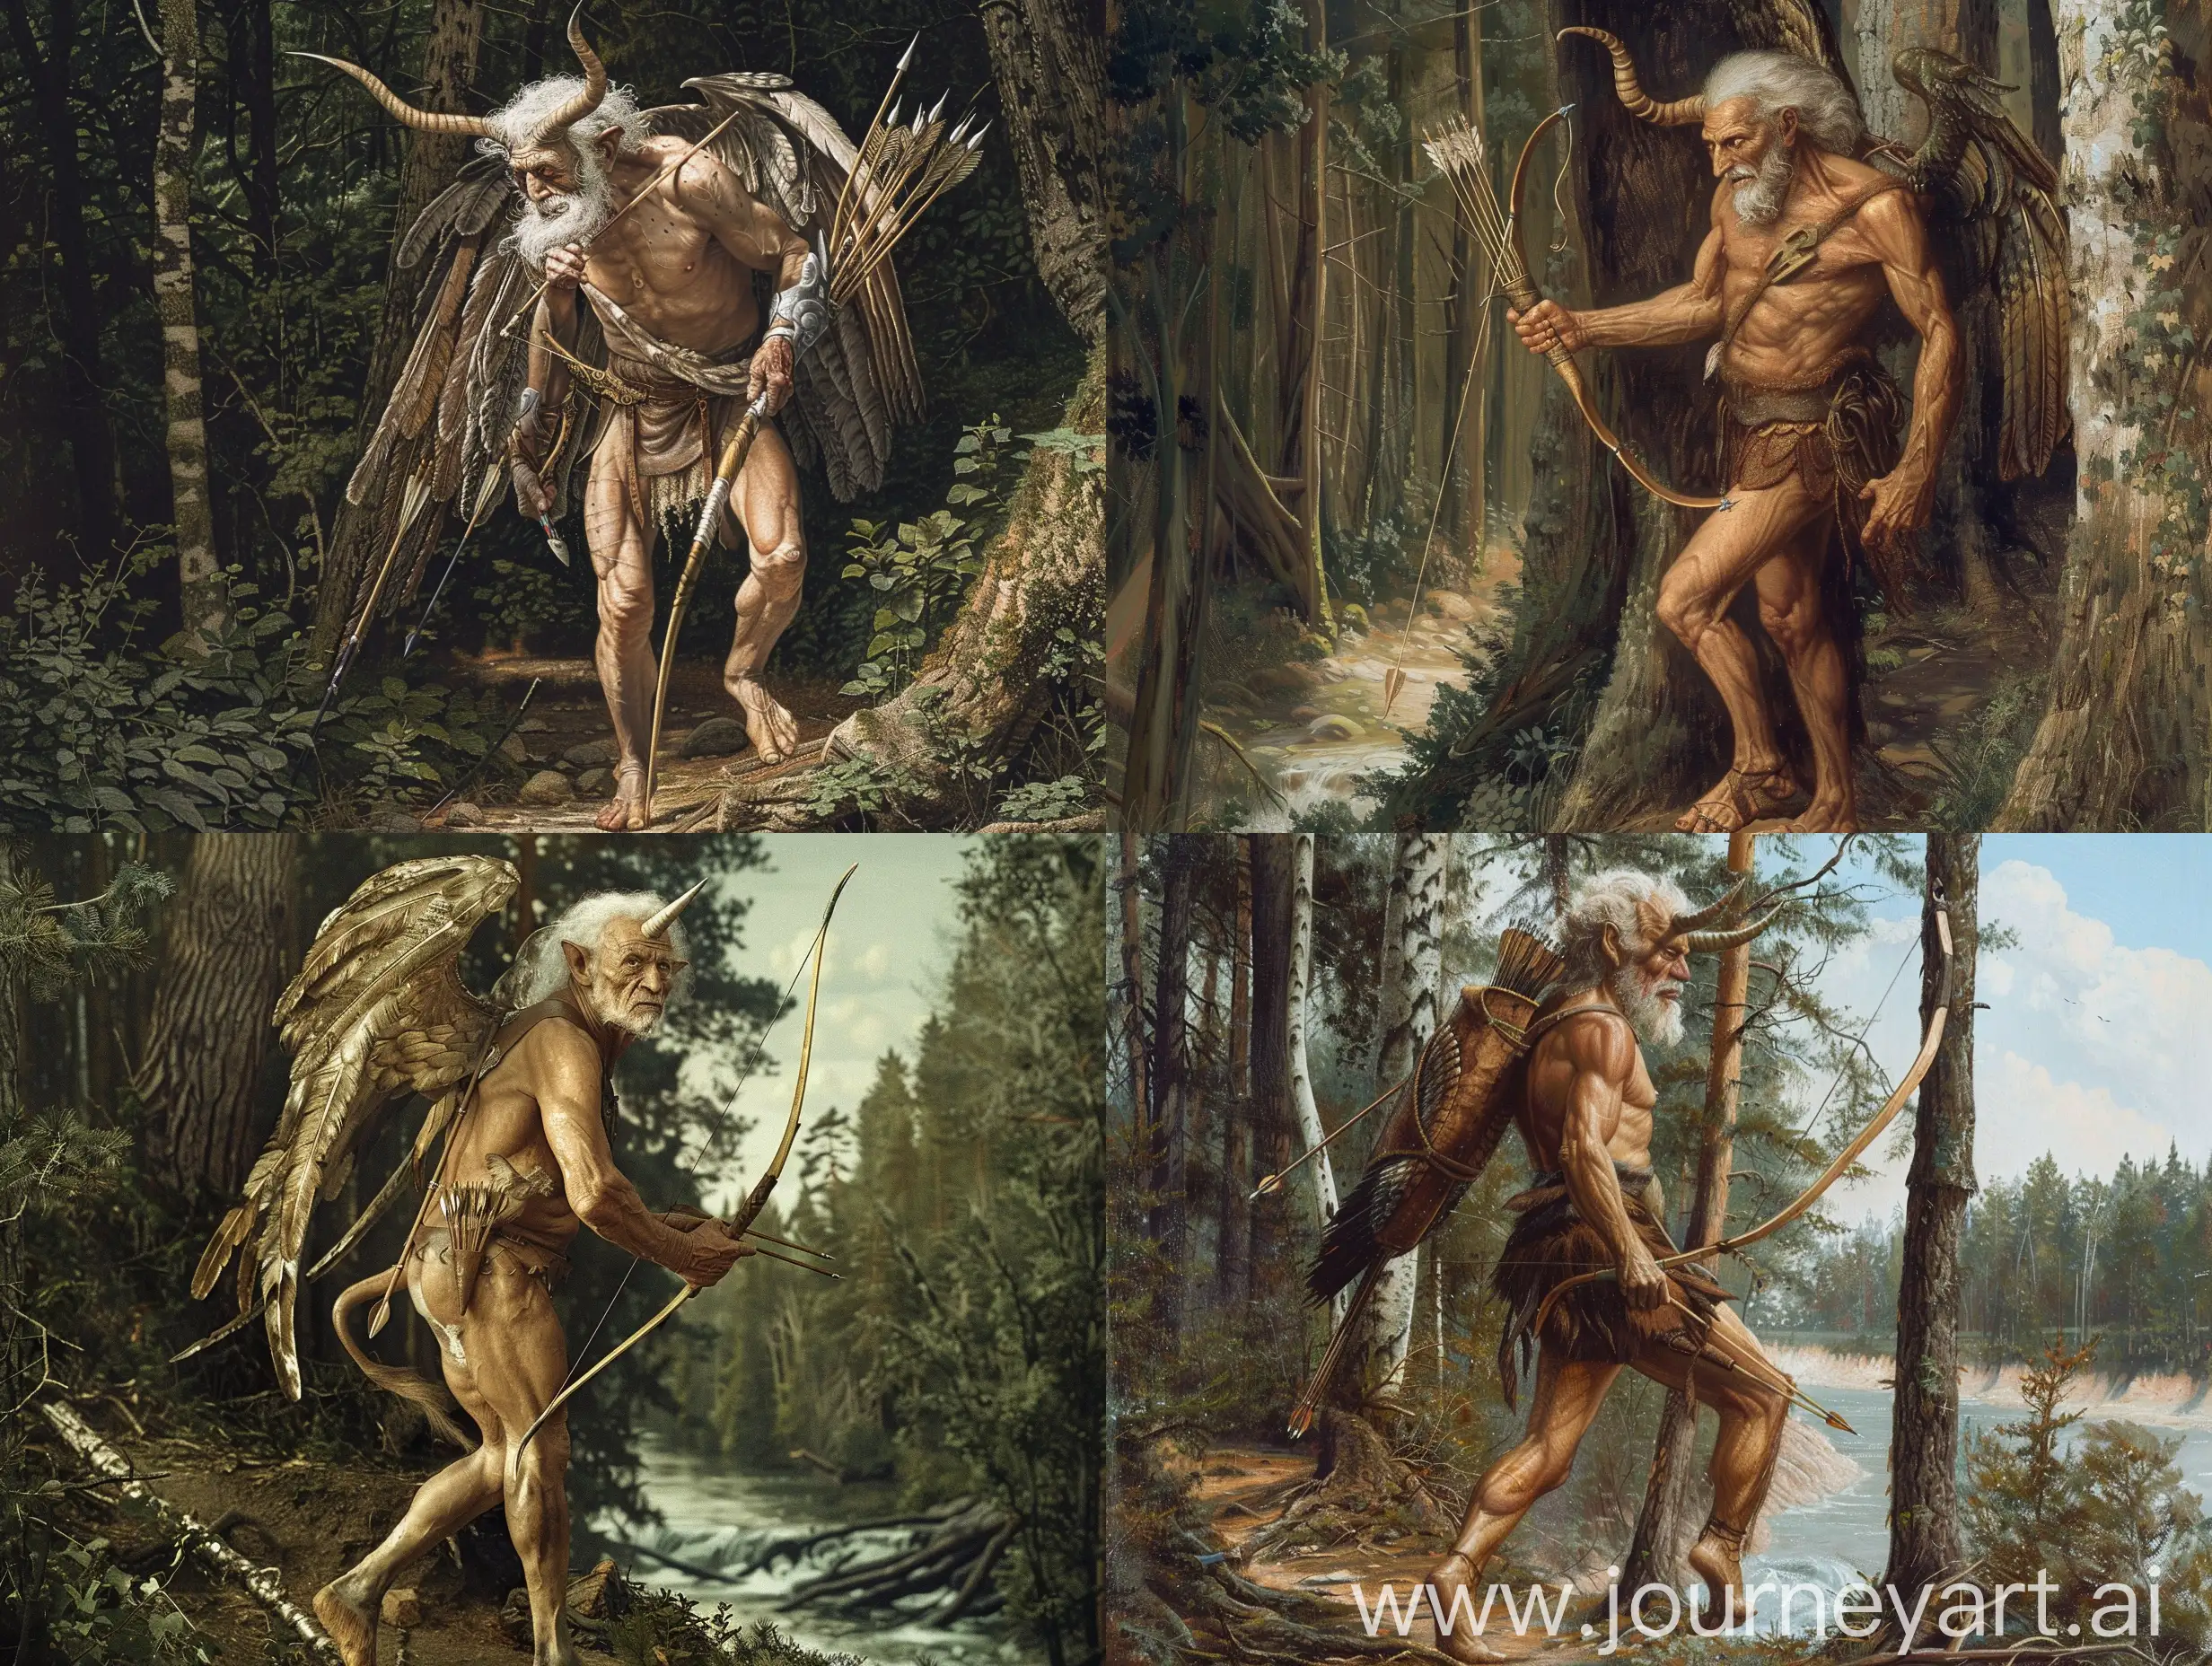 Wise elderly centaur Chiron, with a quiver of arrows behind his back, steps out of the woods onto the edge of the forest, photorealism, without horns, without wings